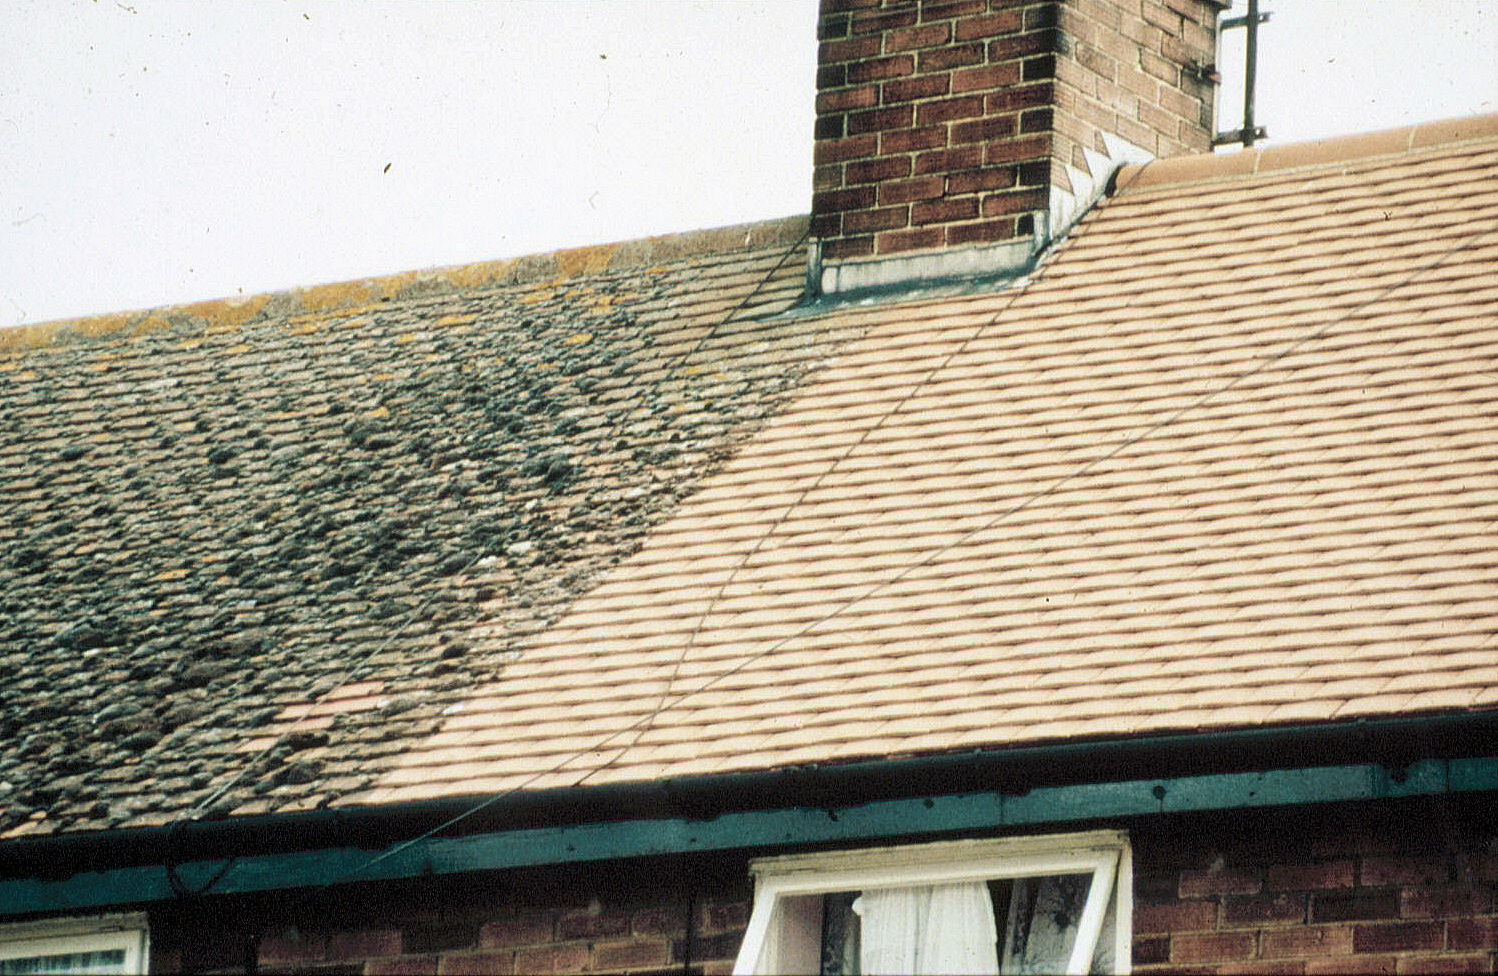 Prada reccomend Roof penetration after roofing